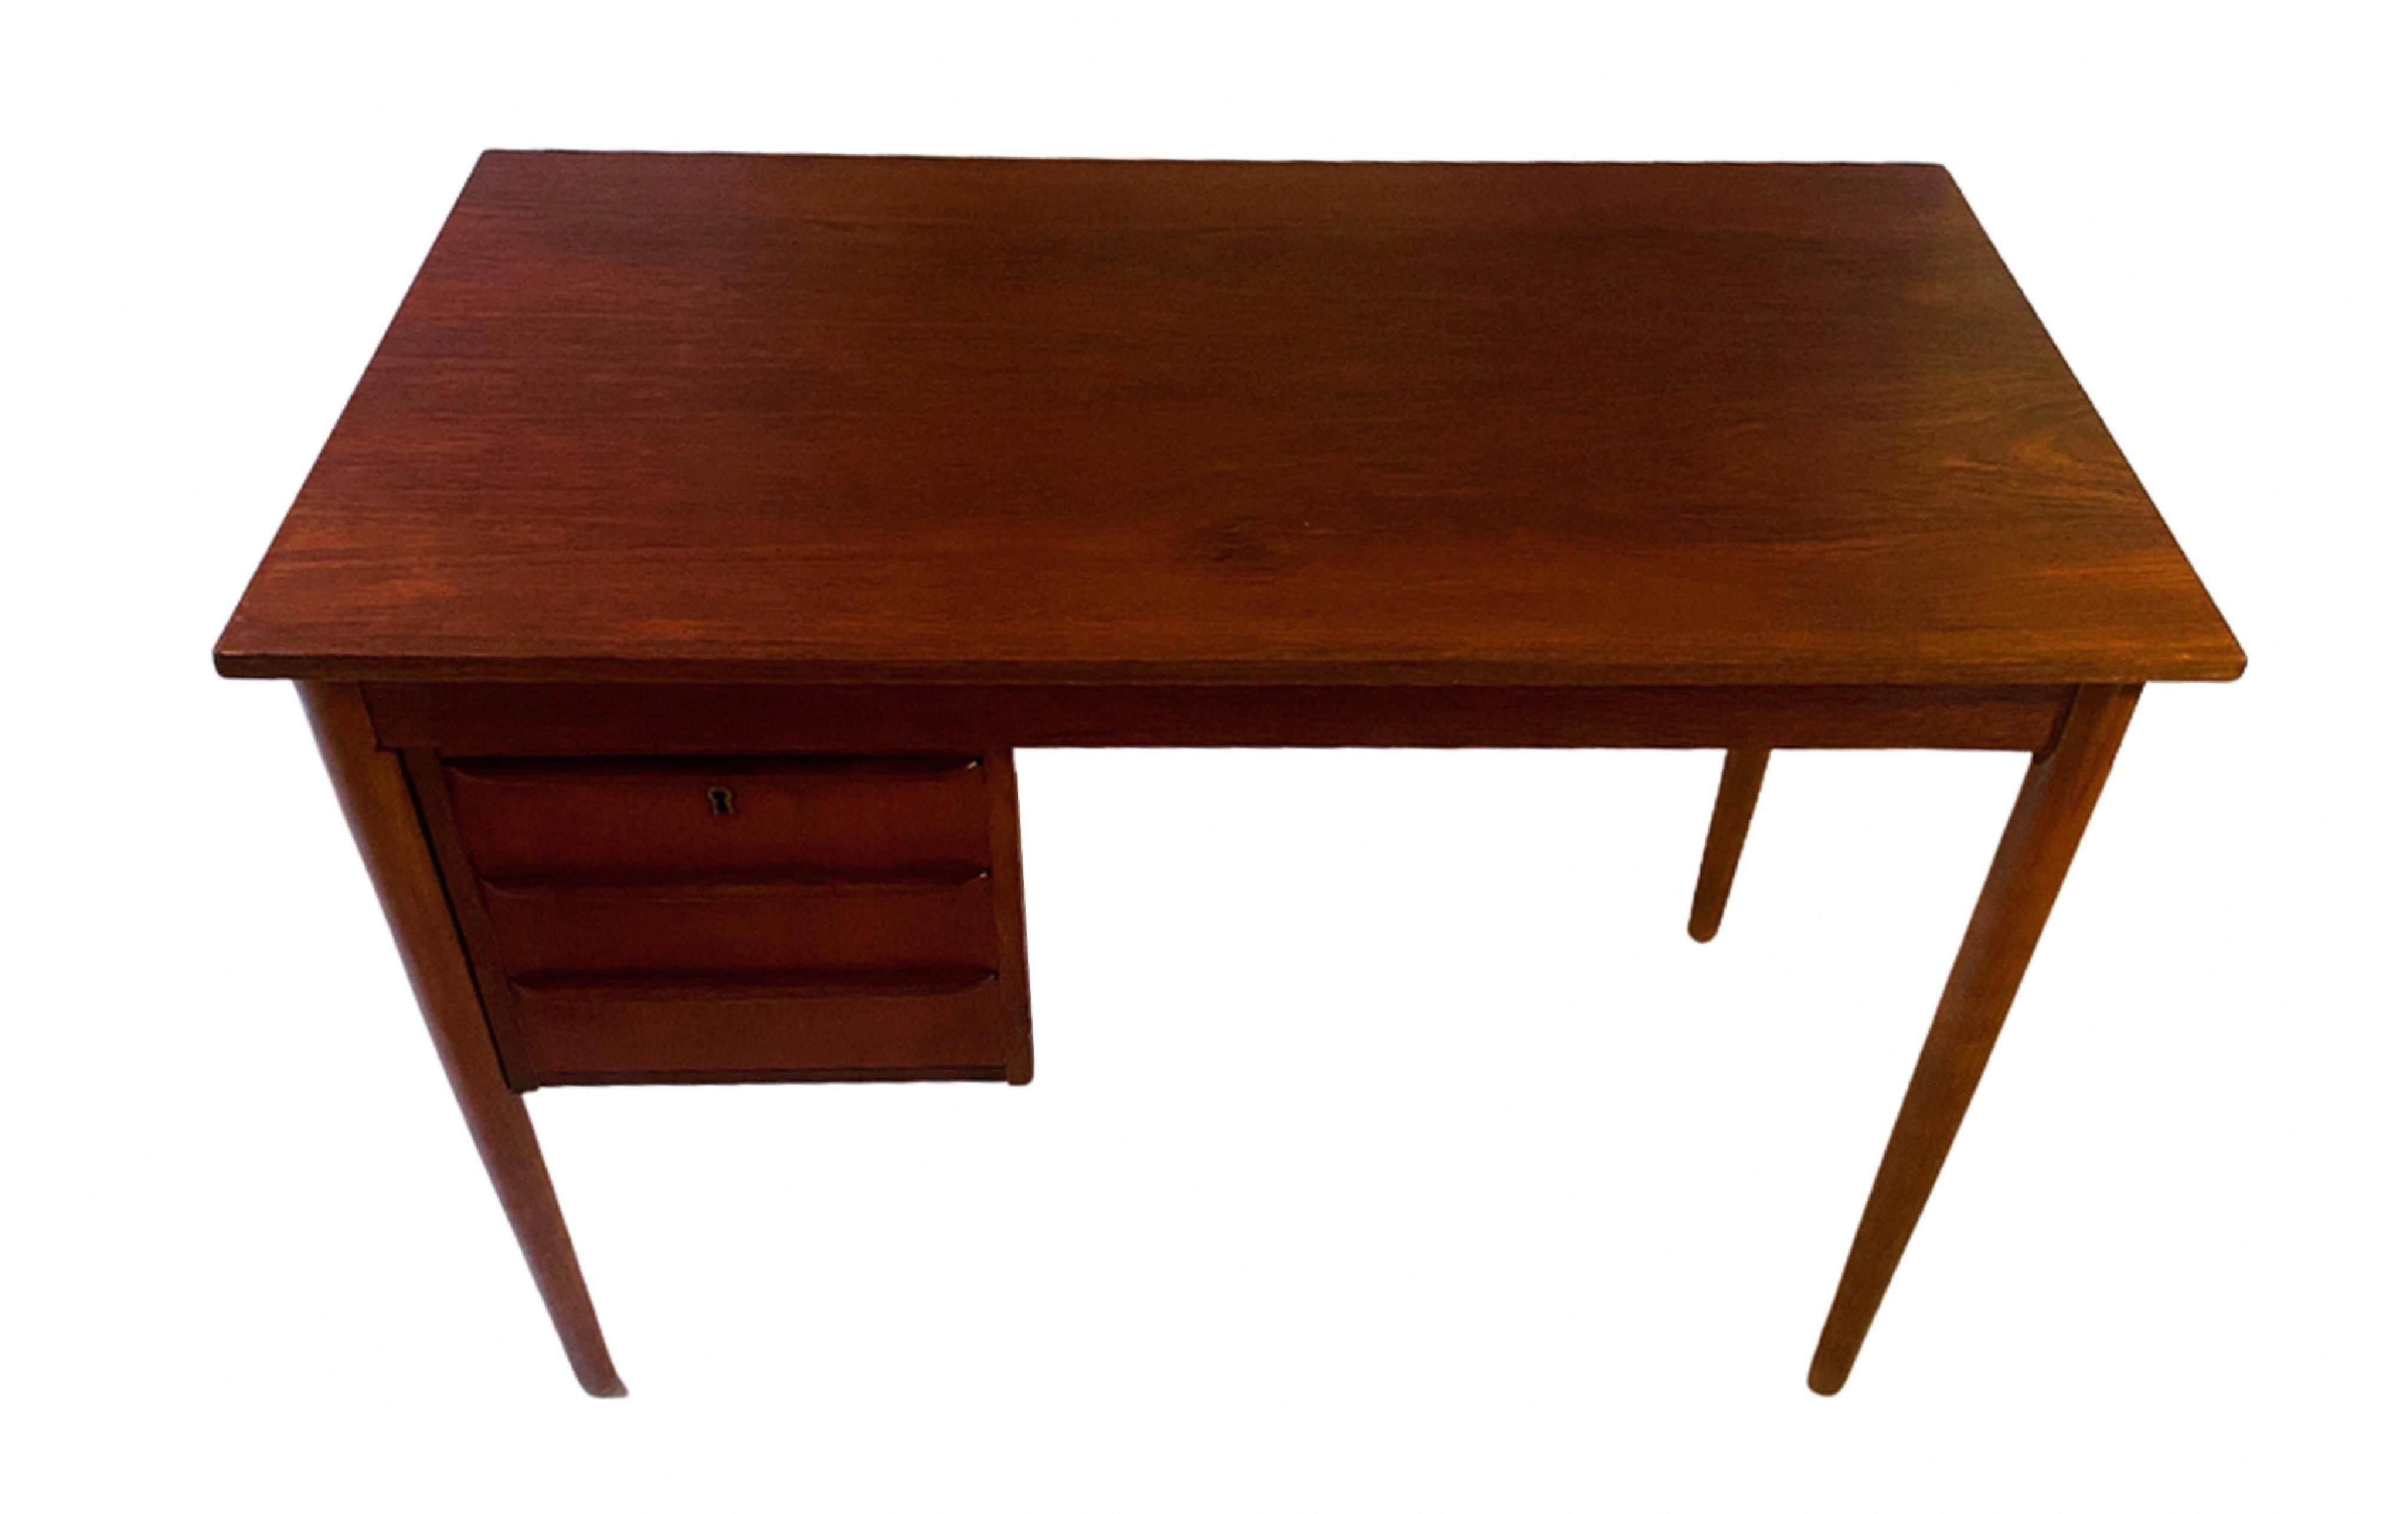 Danish mid-century writing desk in teak with three drawers.

Produced by Danish furniture manufactor.

We have gently restored the table to the absolute highest standard while keeping its original style and appearance.   



NielsenClassics delivers